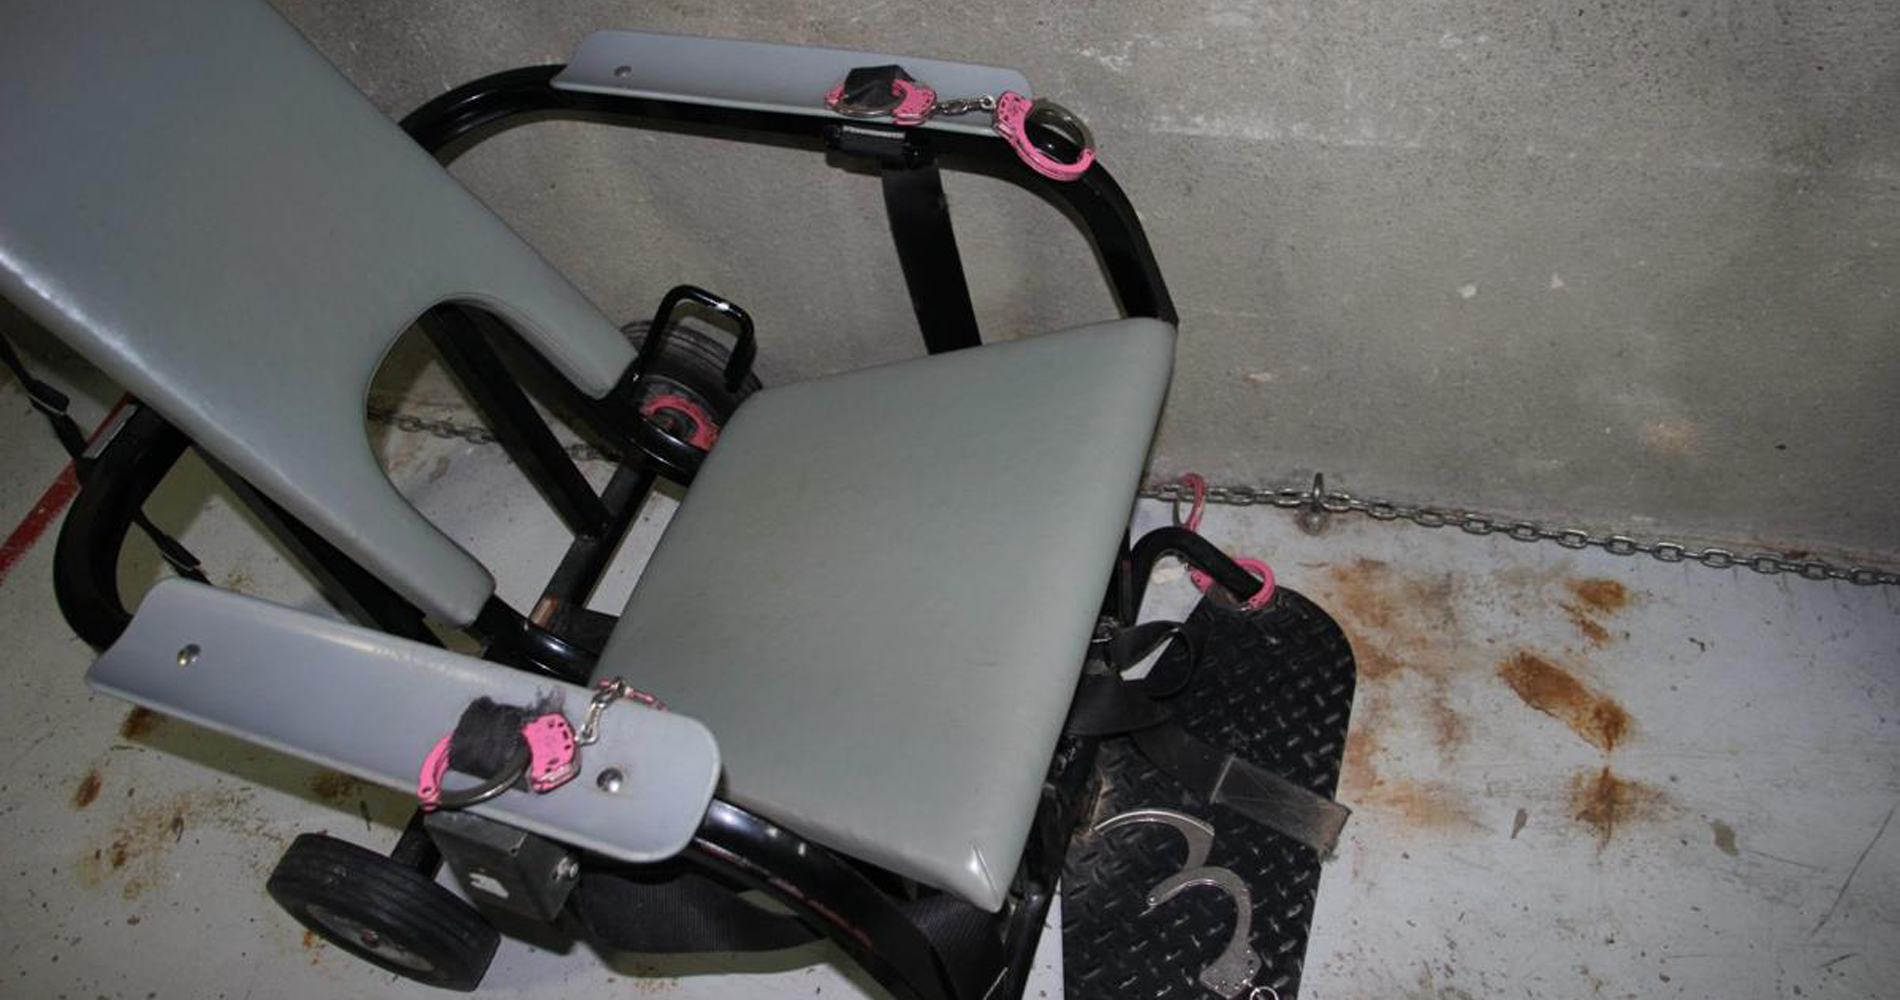 Use of Restraint Chair Linked to 20 Recent Jail Deaths